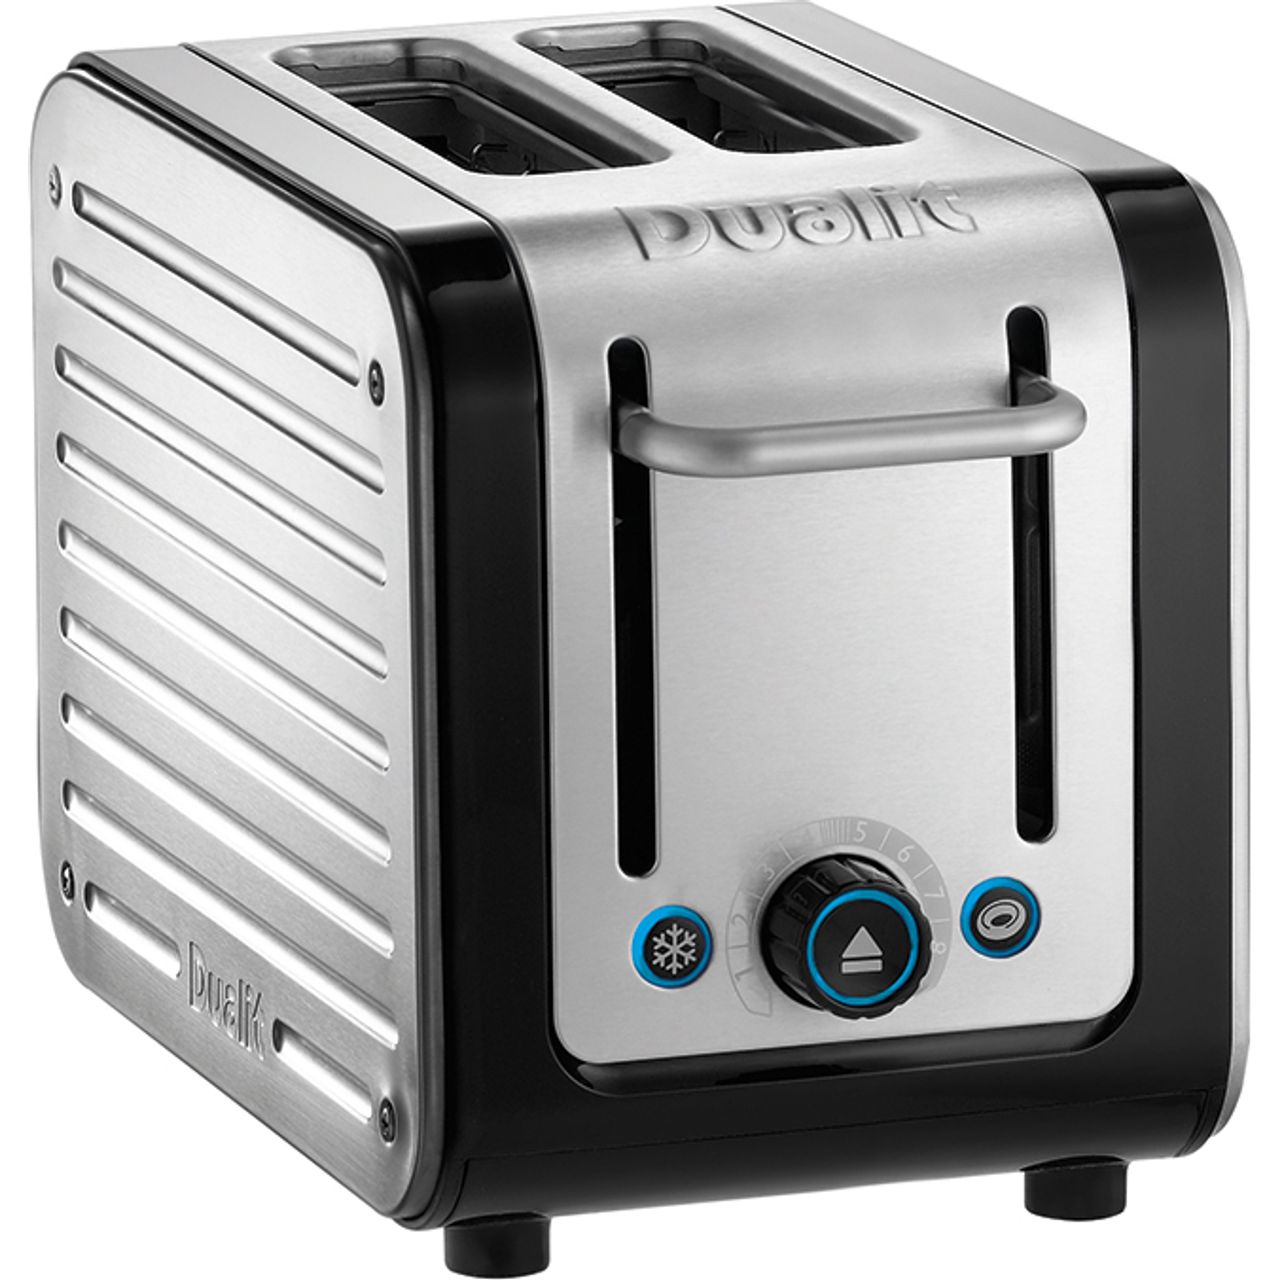 https://assets.products-live.ao.com/Images/ad19eee4-add7-4c23-a867-4db916f501b5/1280x1280/26505_si_dualit_toaster_01.jpg